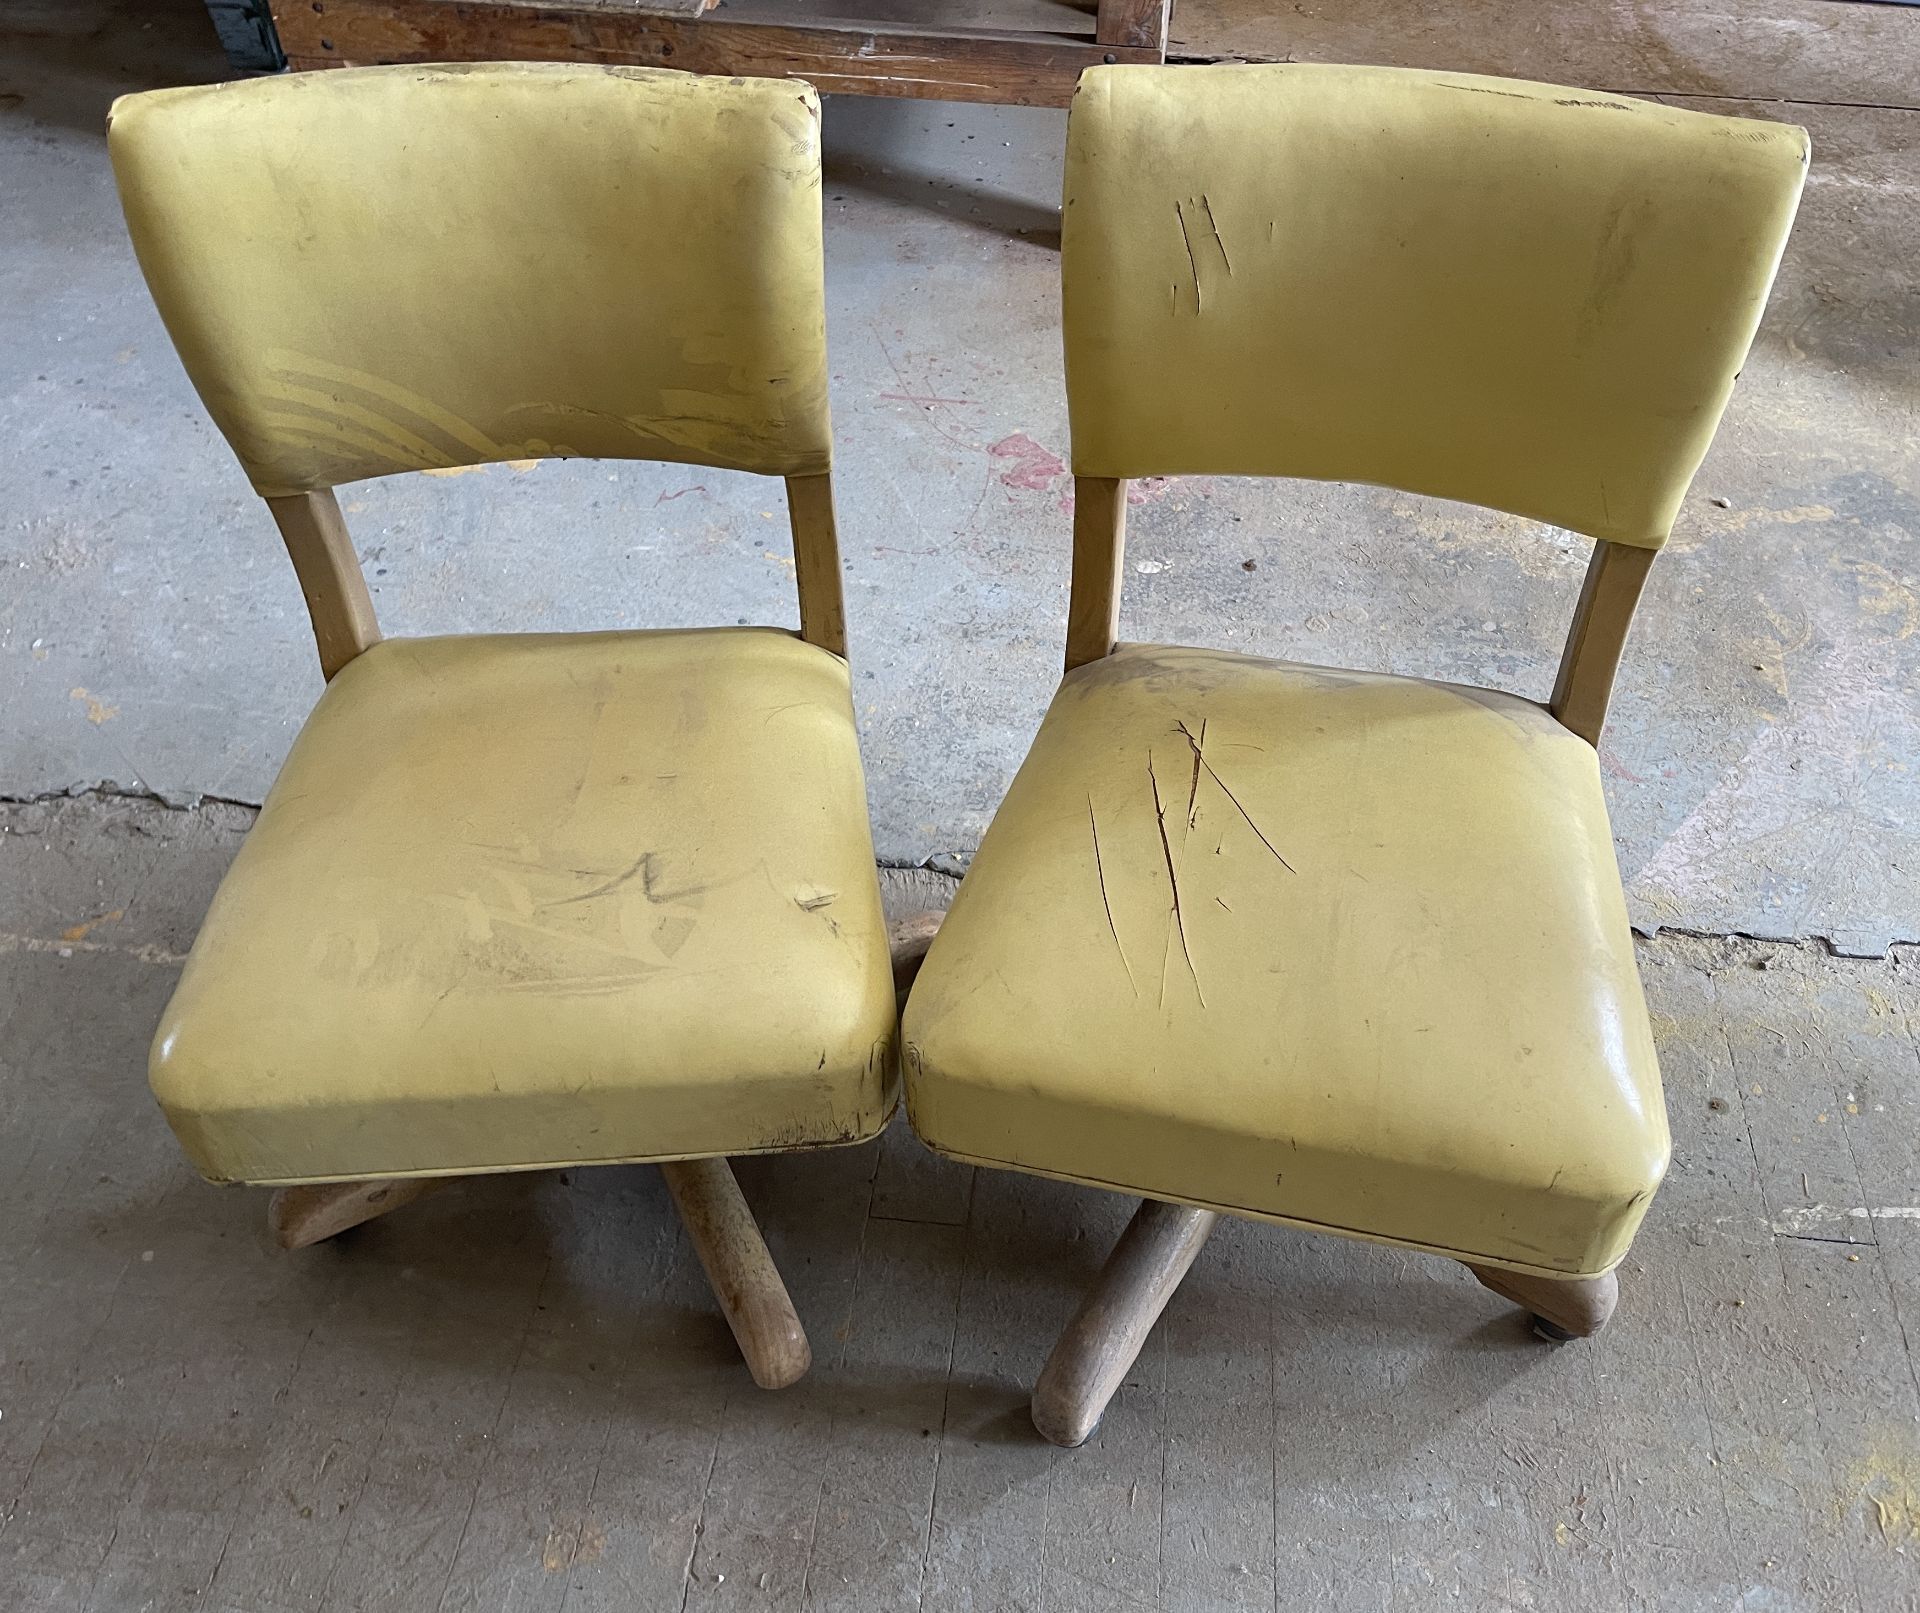 2 STOW AND DAVID FURNITURE CO ART DECO VINTAGE YELLOW CHAIRS